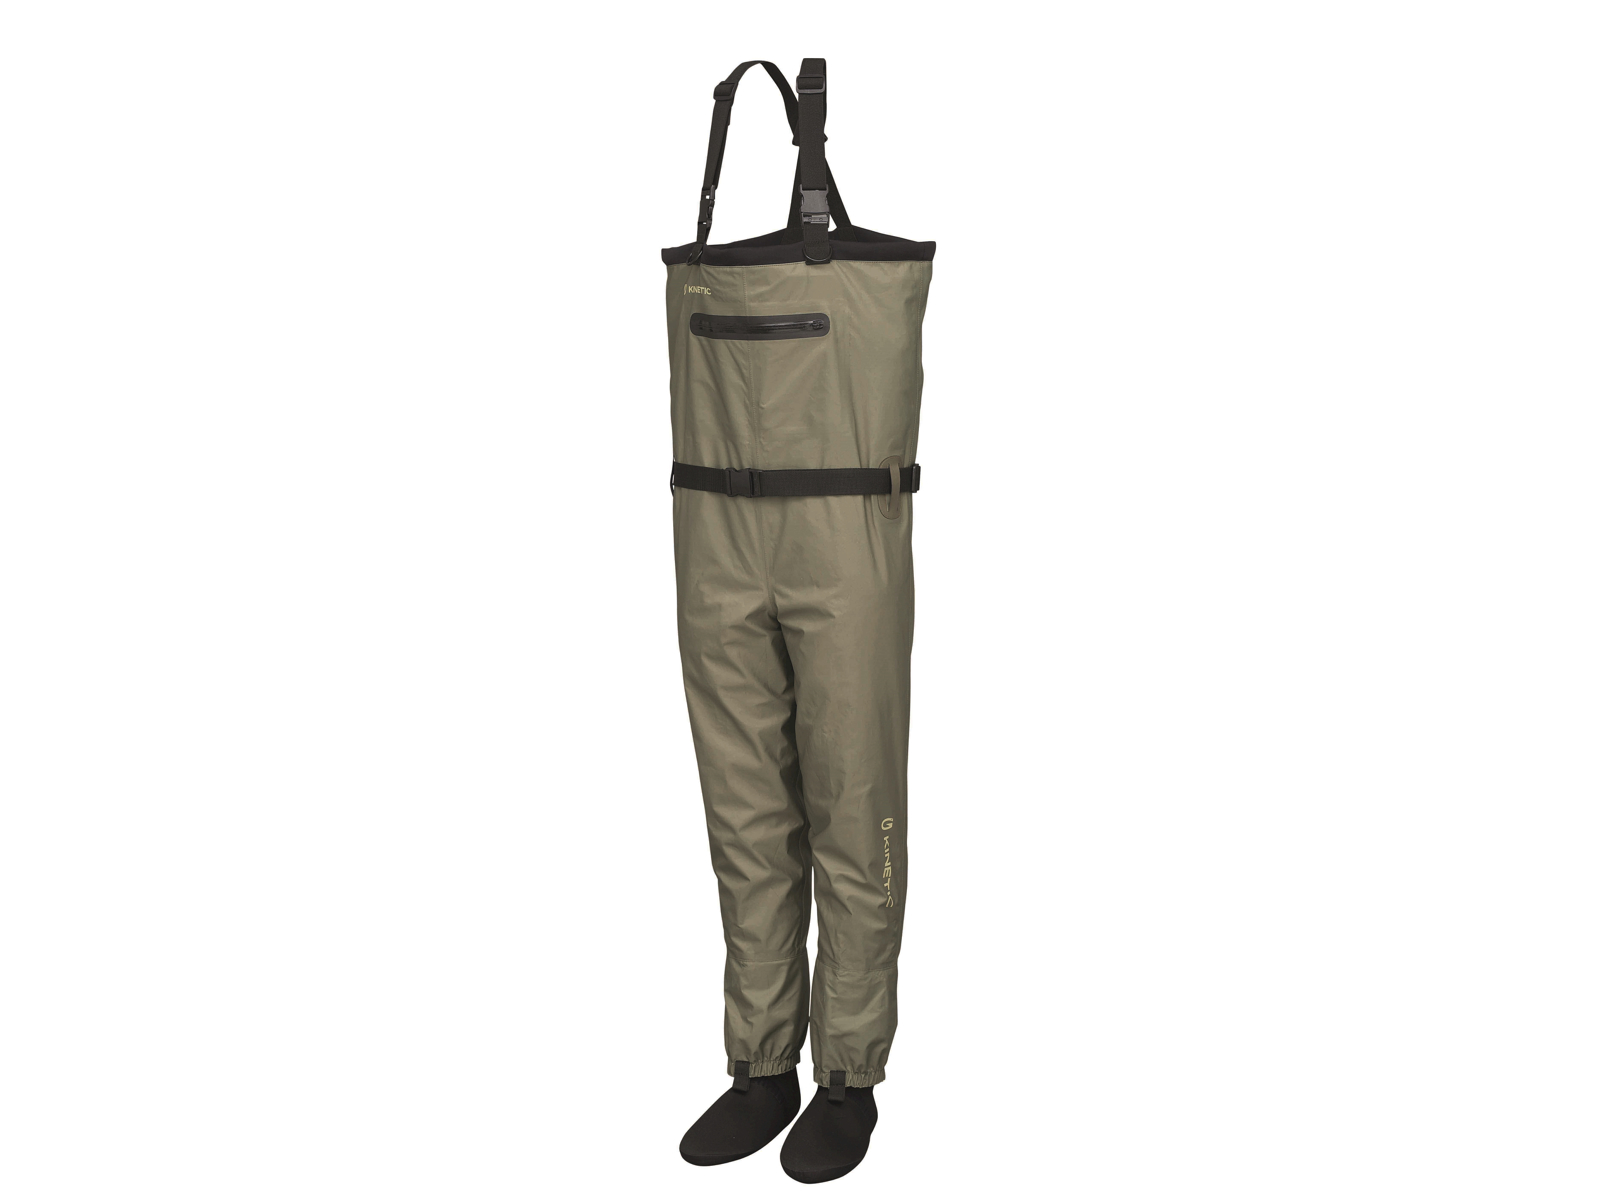 Kinetic Classic Gaiter Stocking Foot Breathable Chest Waders Olive